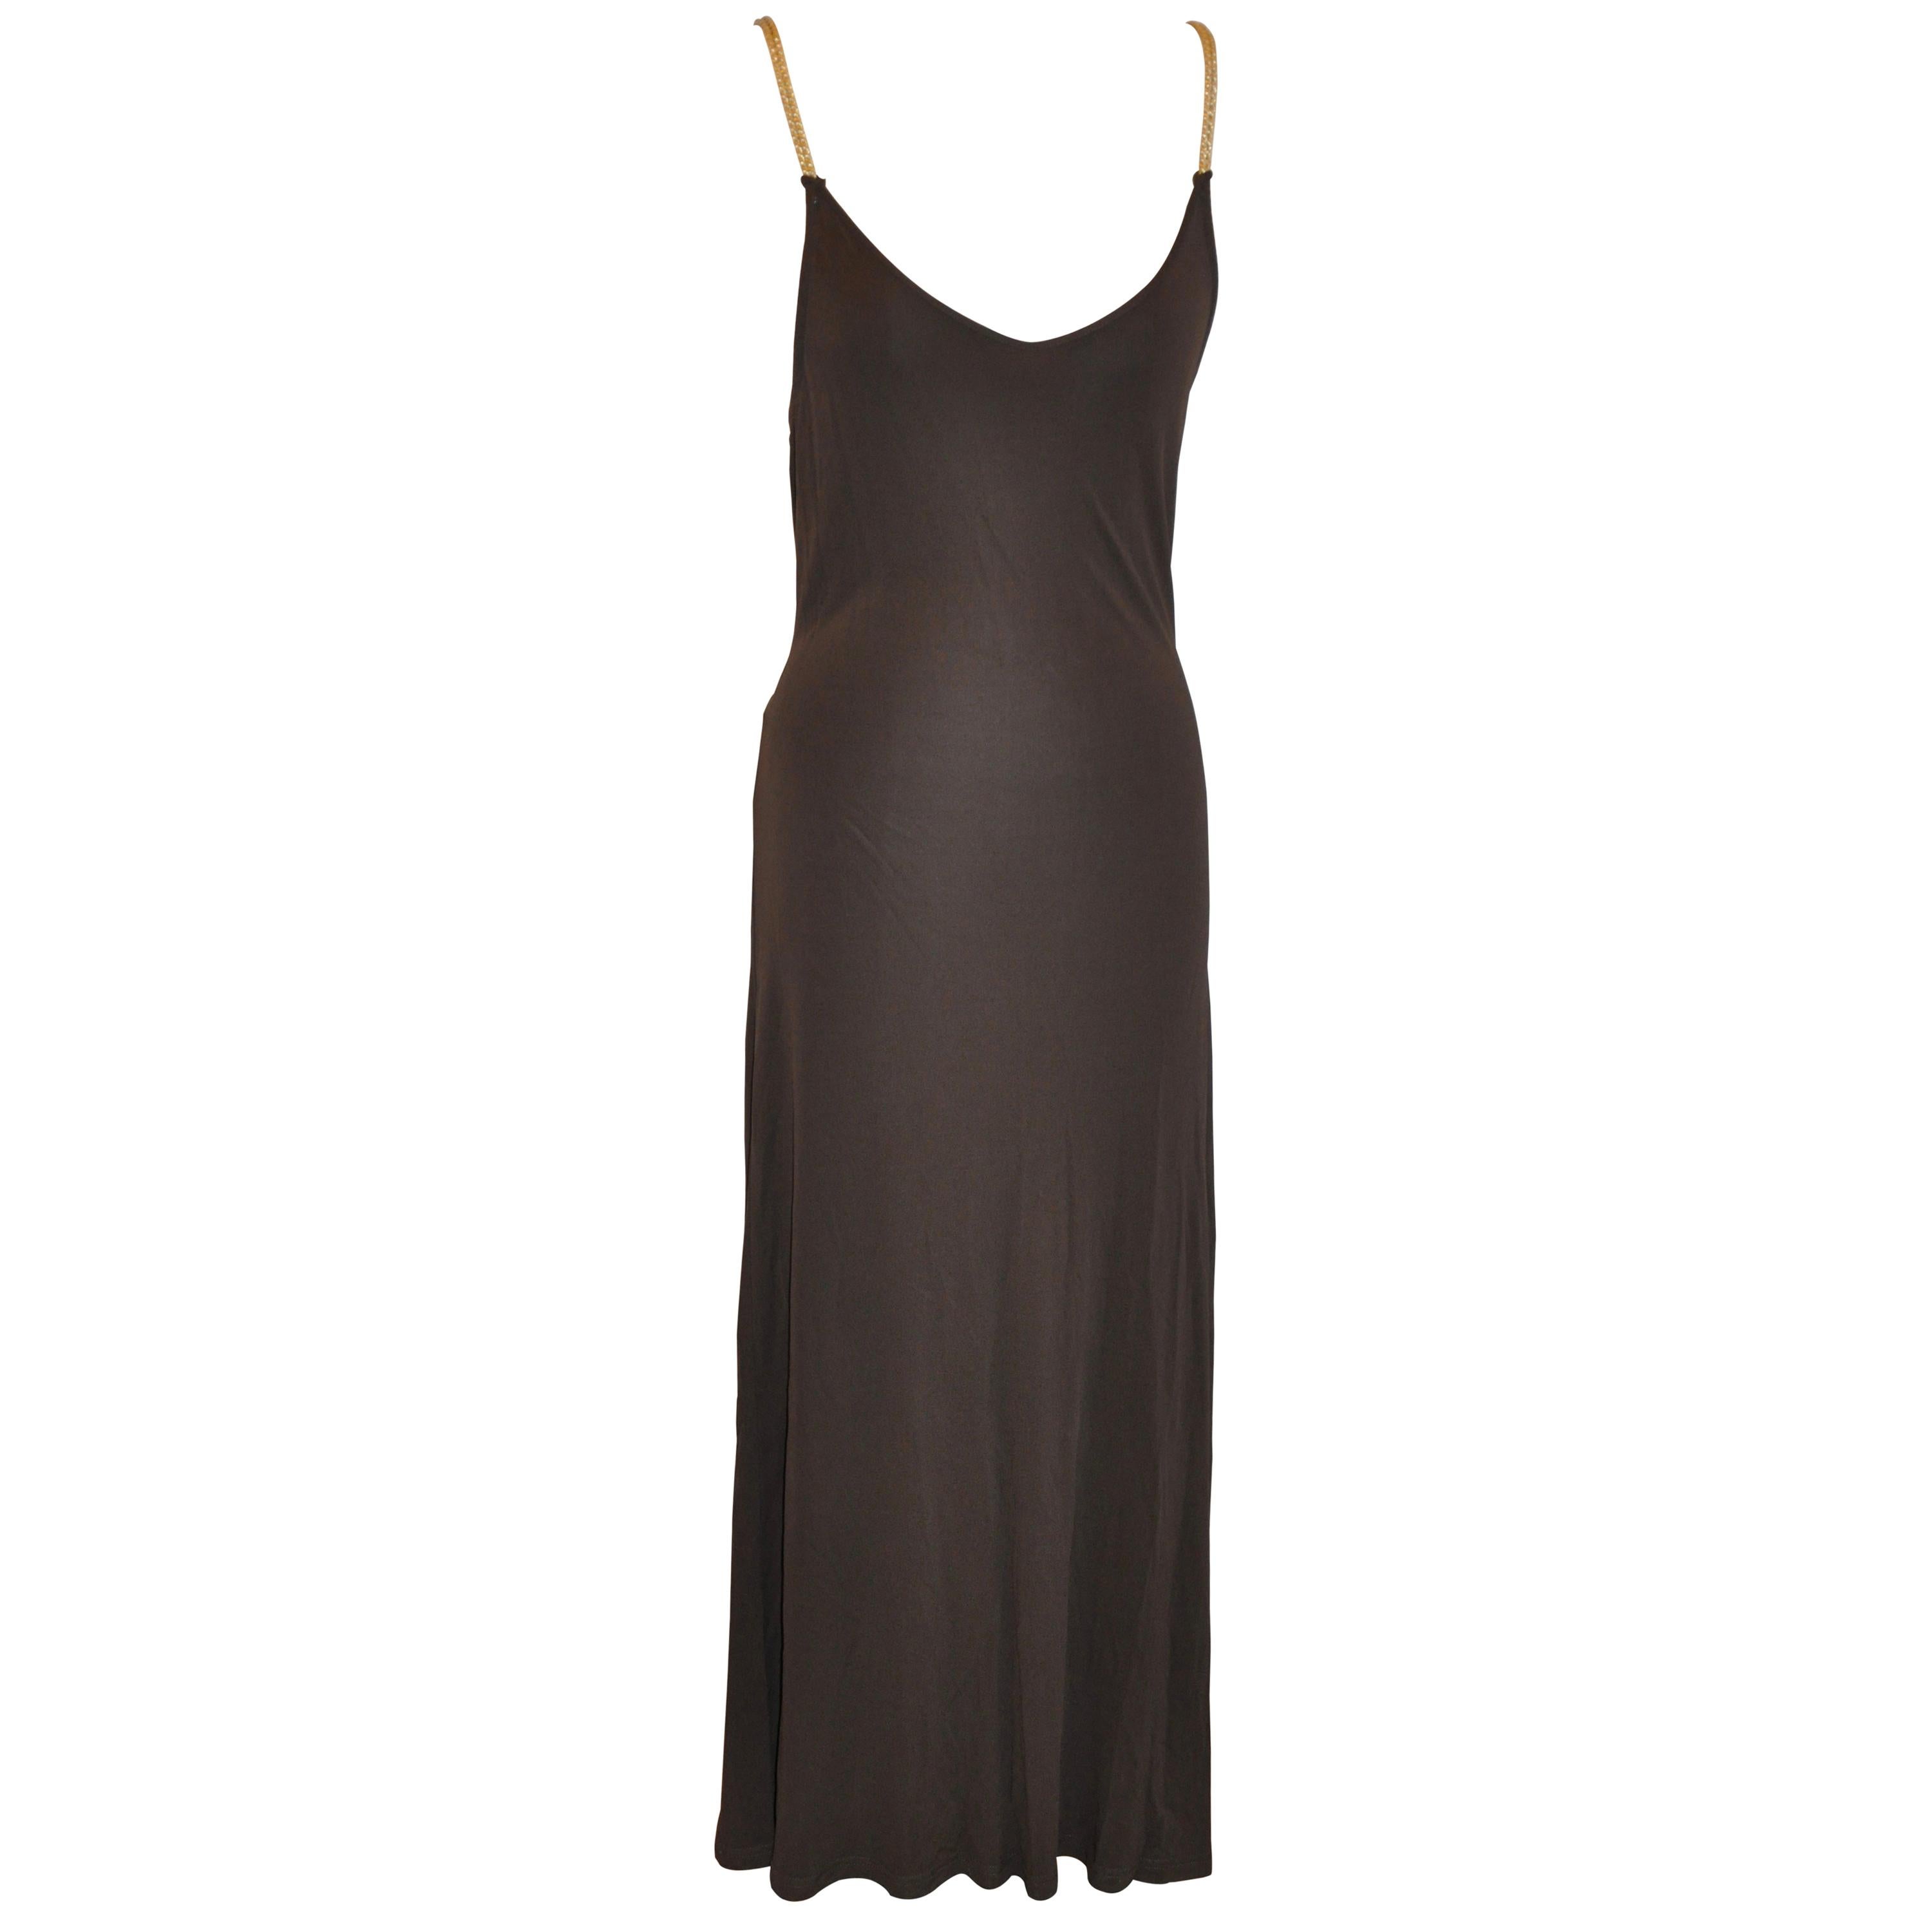 Celine Coco-Brown Silk-Blend Jersey Low-Cut Form-Fitting Maxi Dress